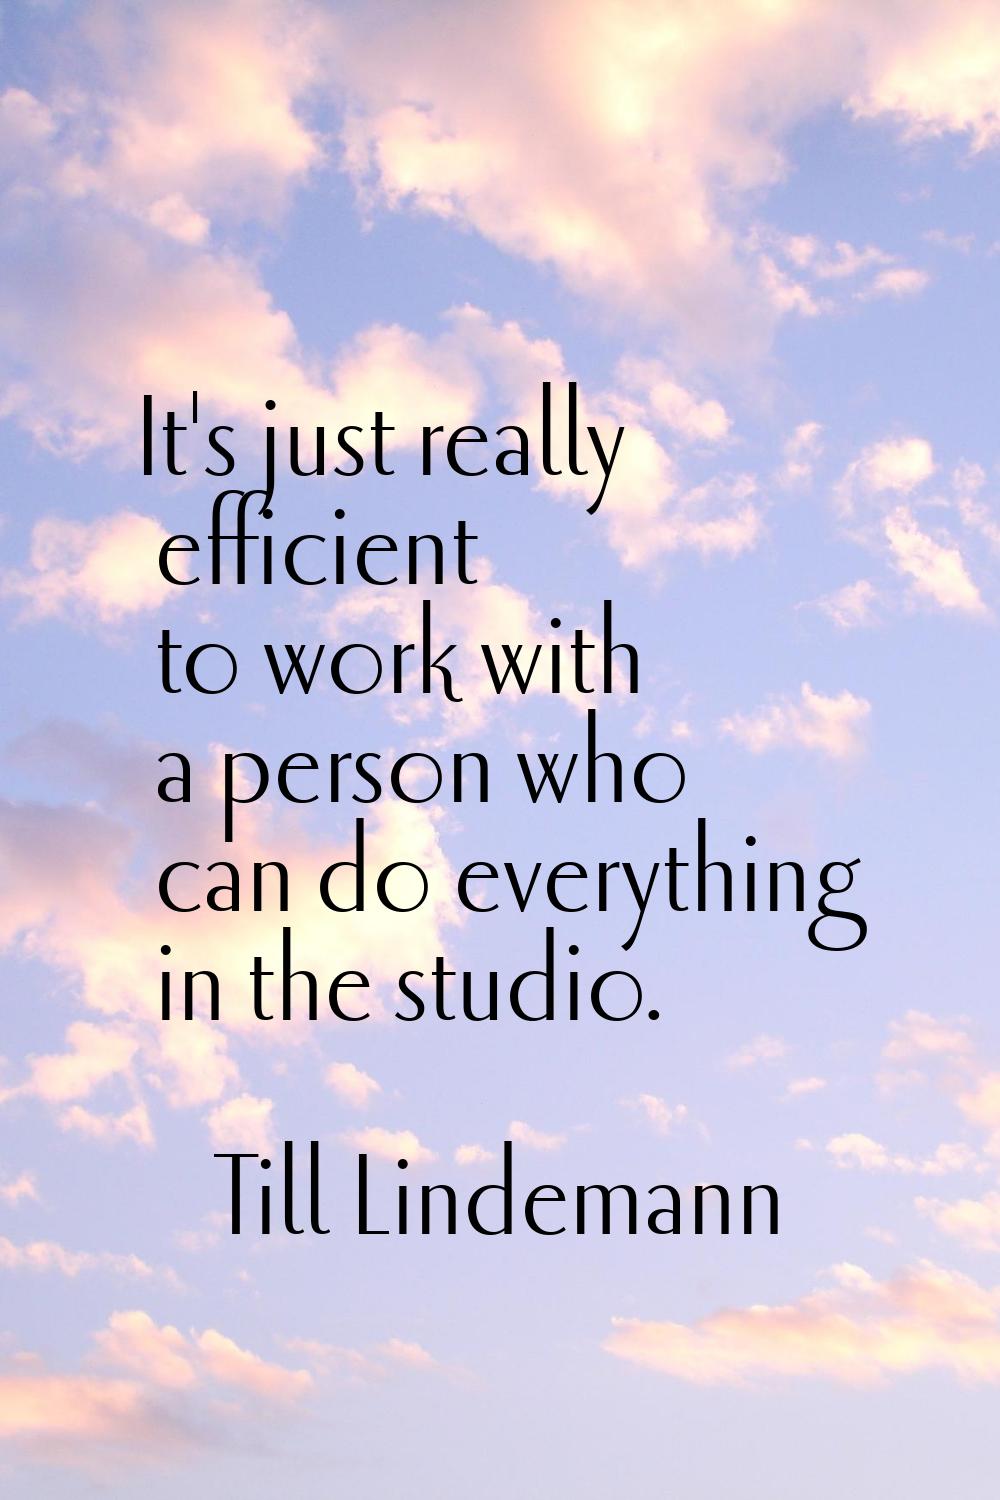 It's just really efficient to work with a person who can do everything in the studio.